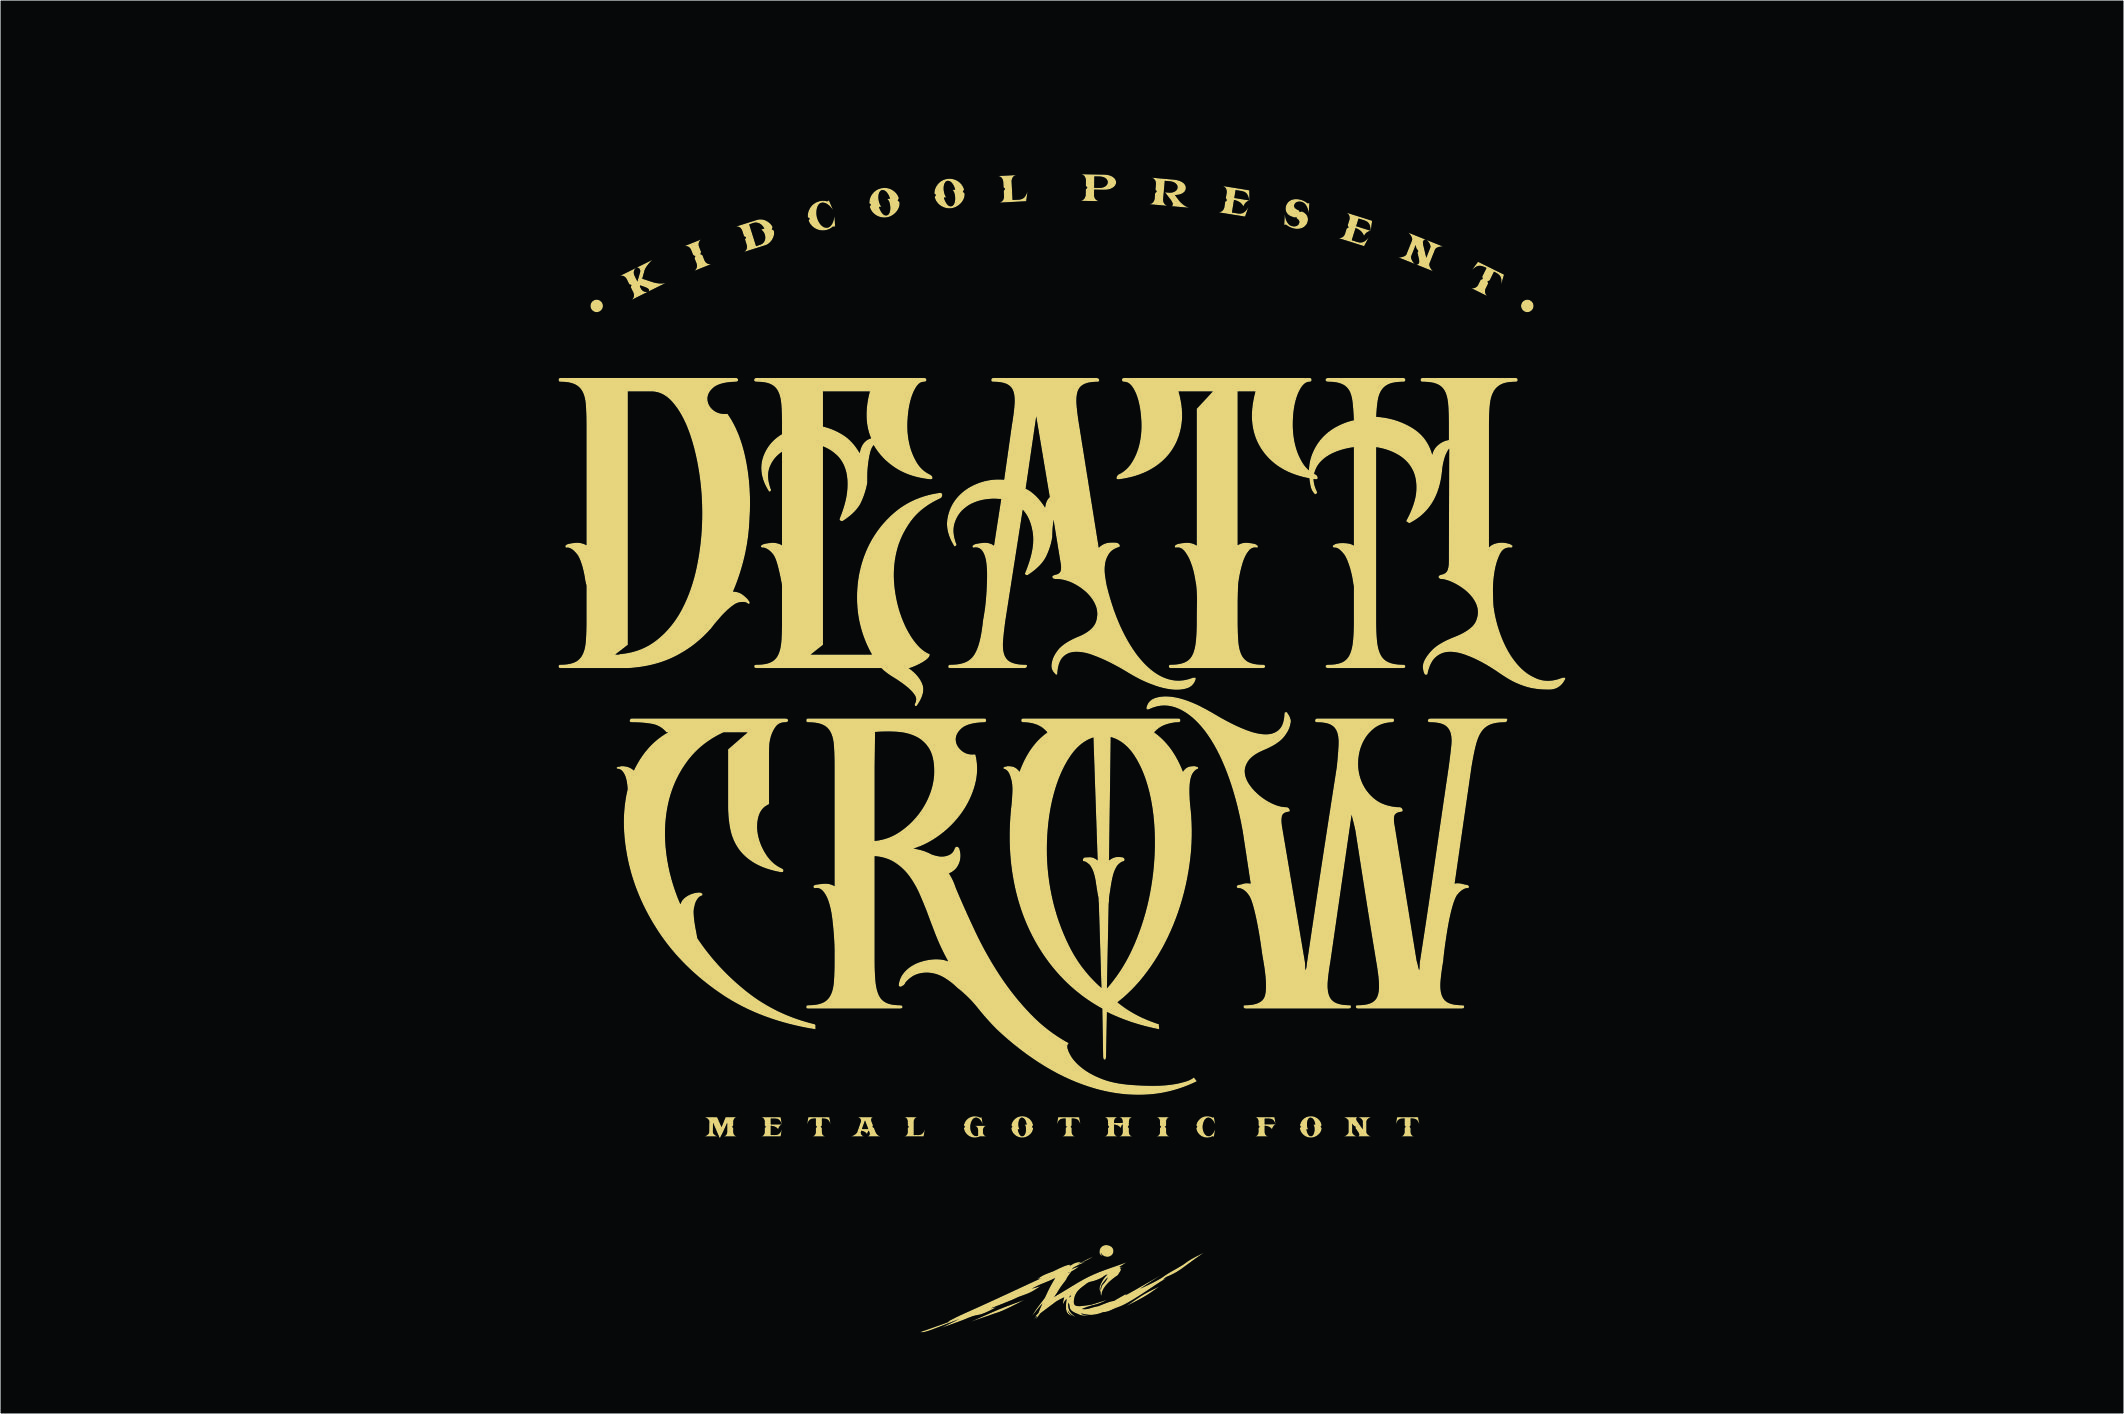 DEATH CROW Font by KIDCOOL FontSpace